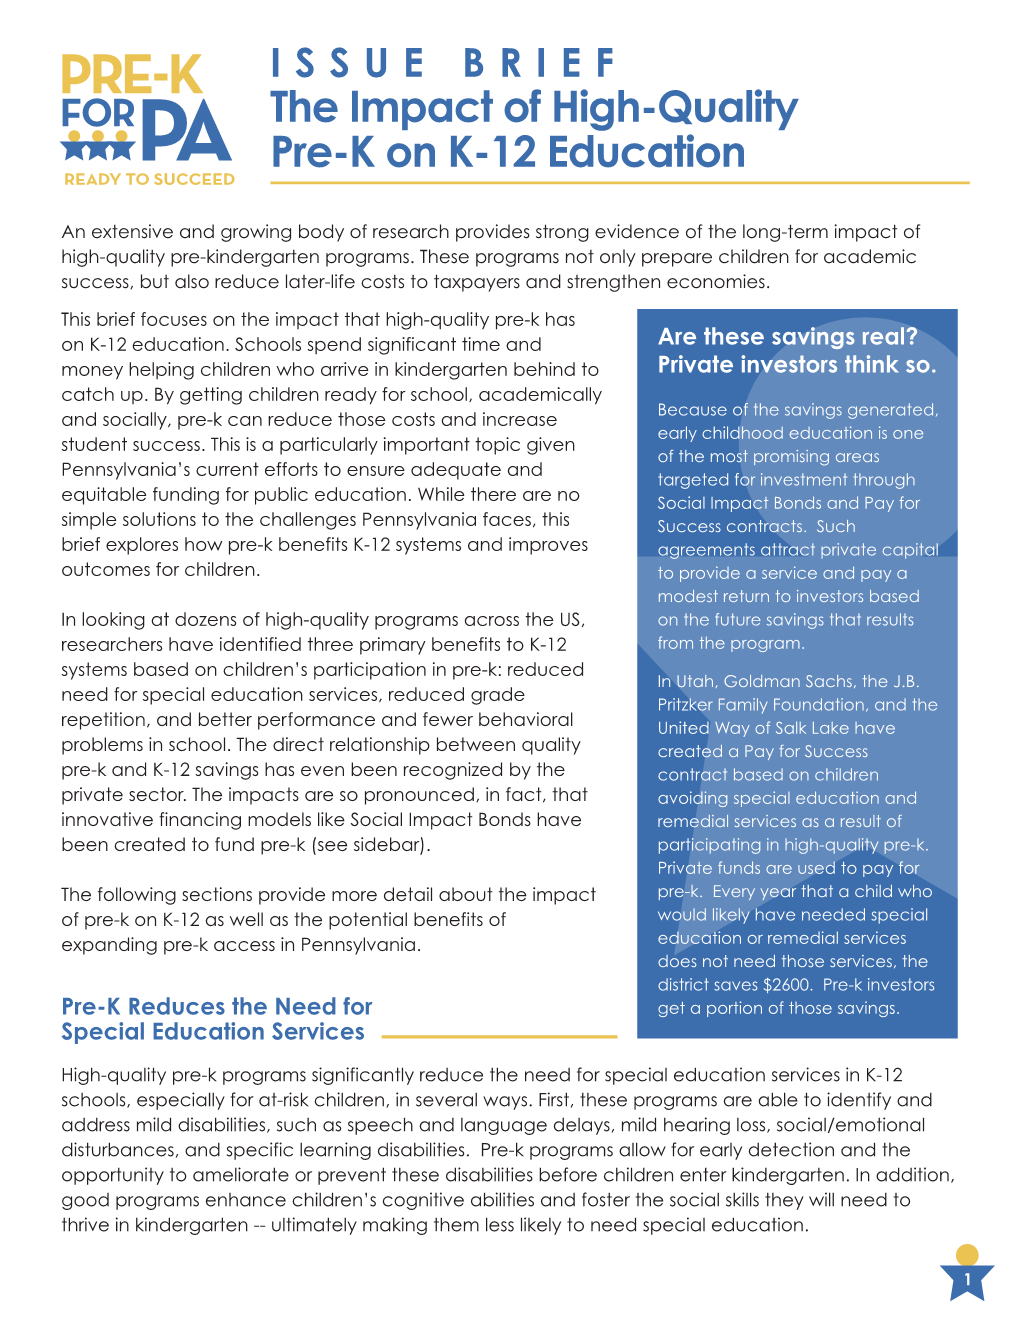 The Impact of High-Quality Pre-K on K-12 Education